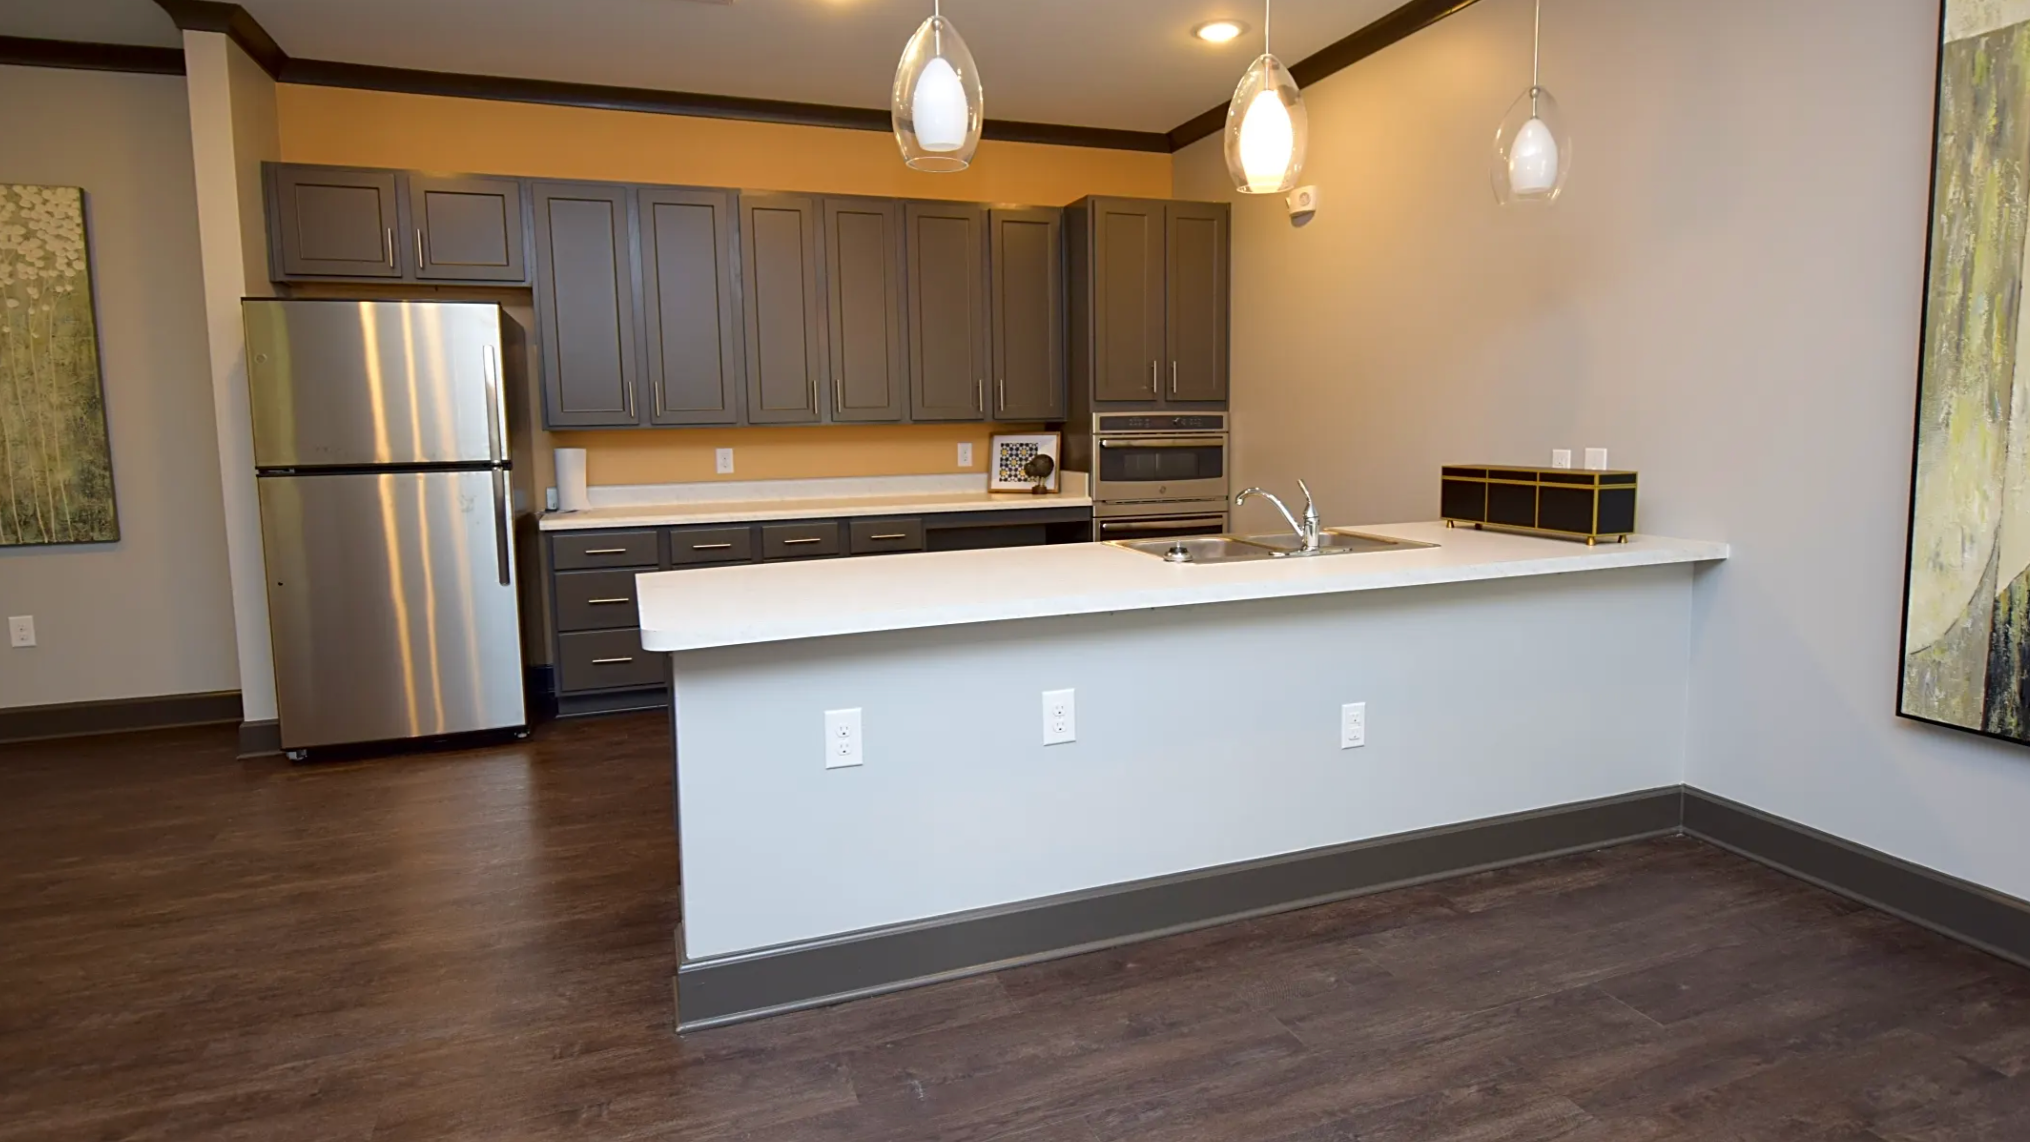 Open concept kitchen with breakfast bar, granite countertops and stainless steel appliances.